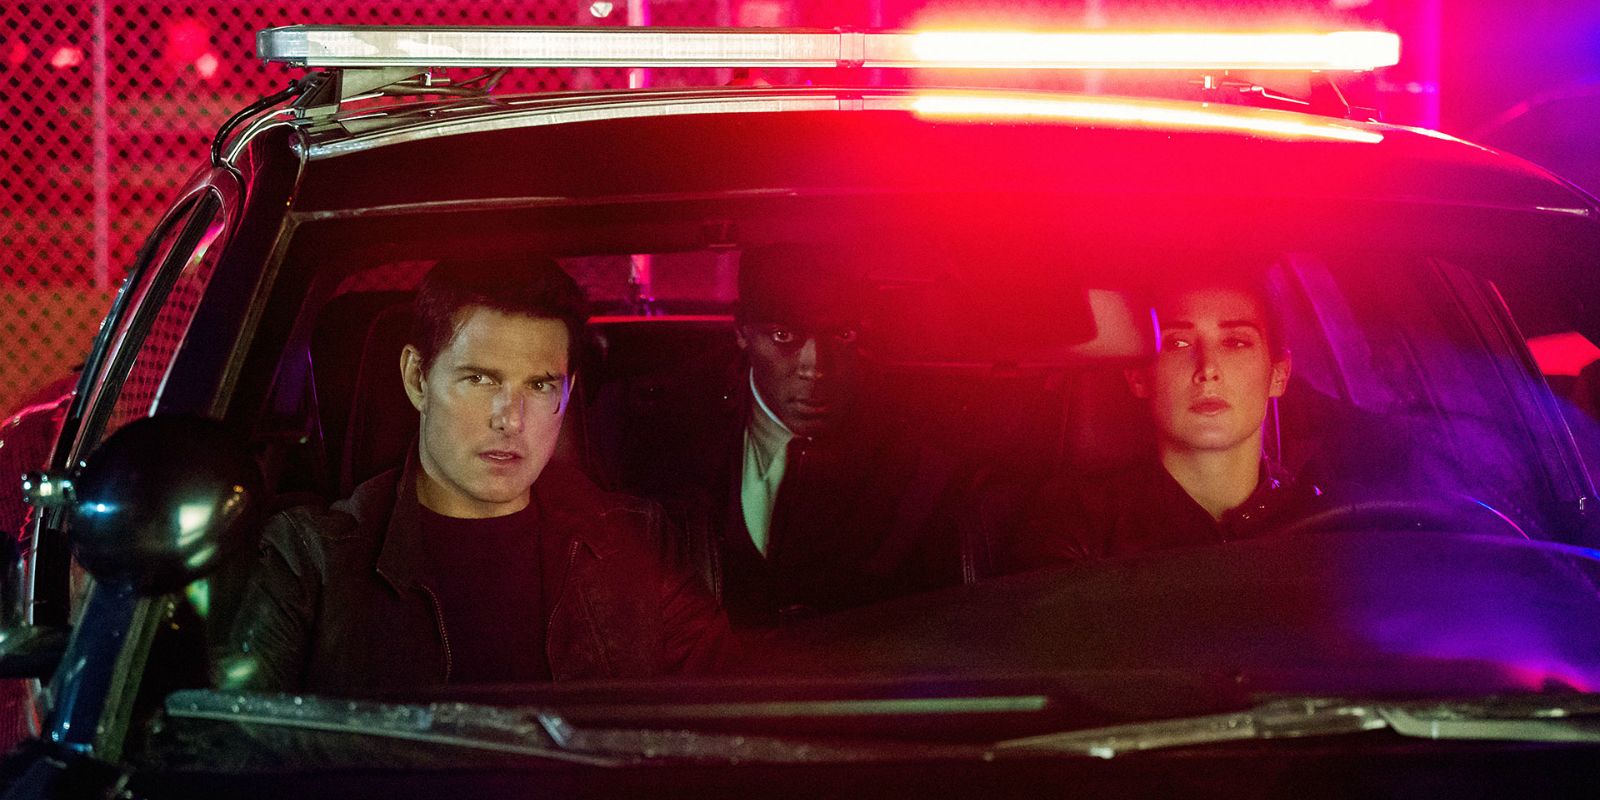 Tom Cruise as Jack Reacher, Aldis Hodge as Espin, and Cobie Smulders as Major Turner in Jack Reacher: Never Go Back